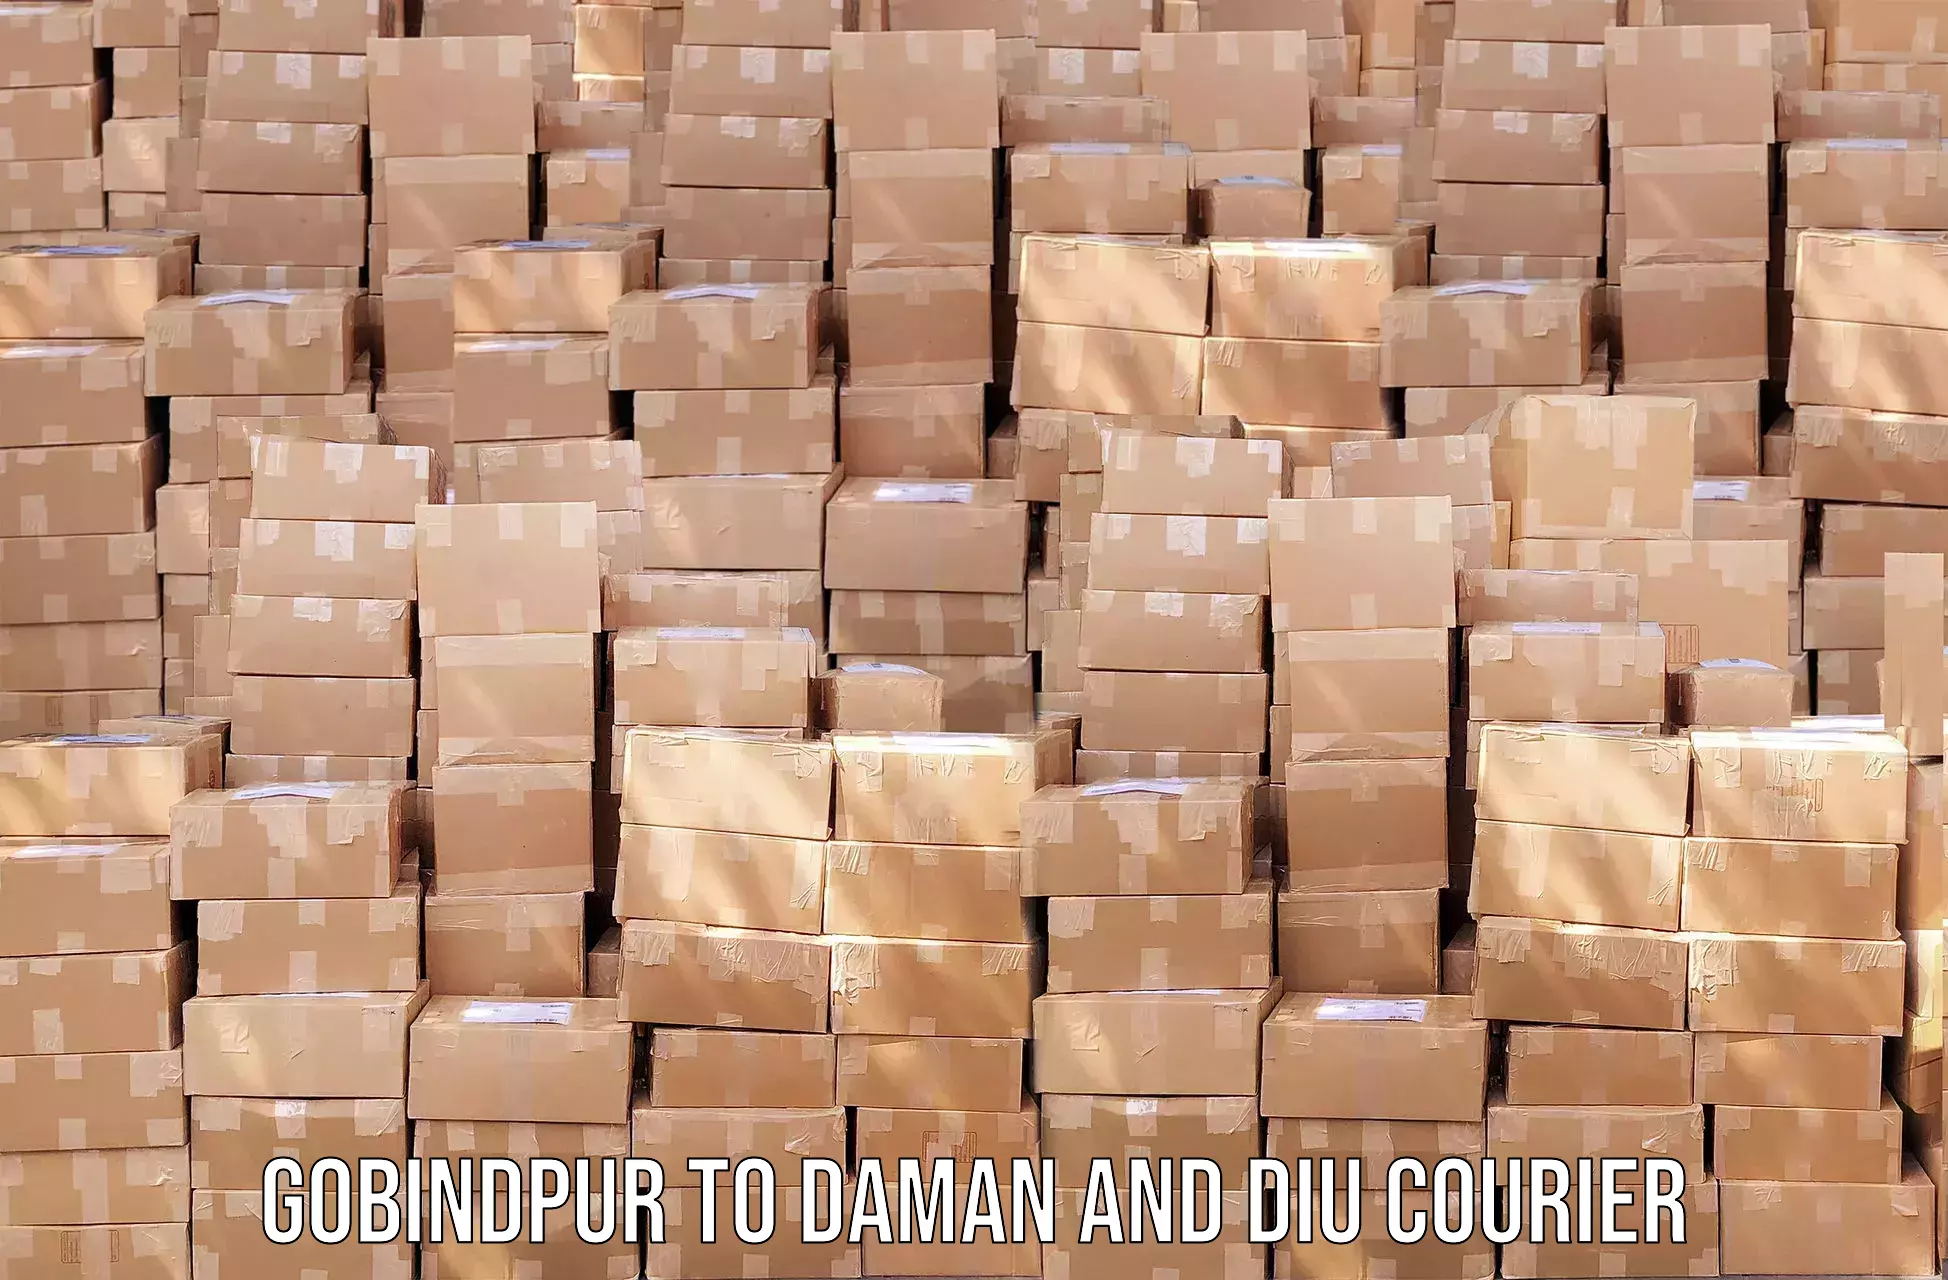 Customer-oriented courier services Gobindpur to Daman and Diu